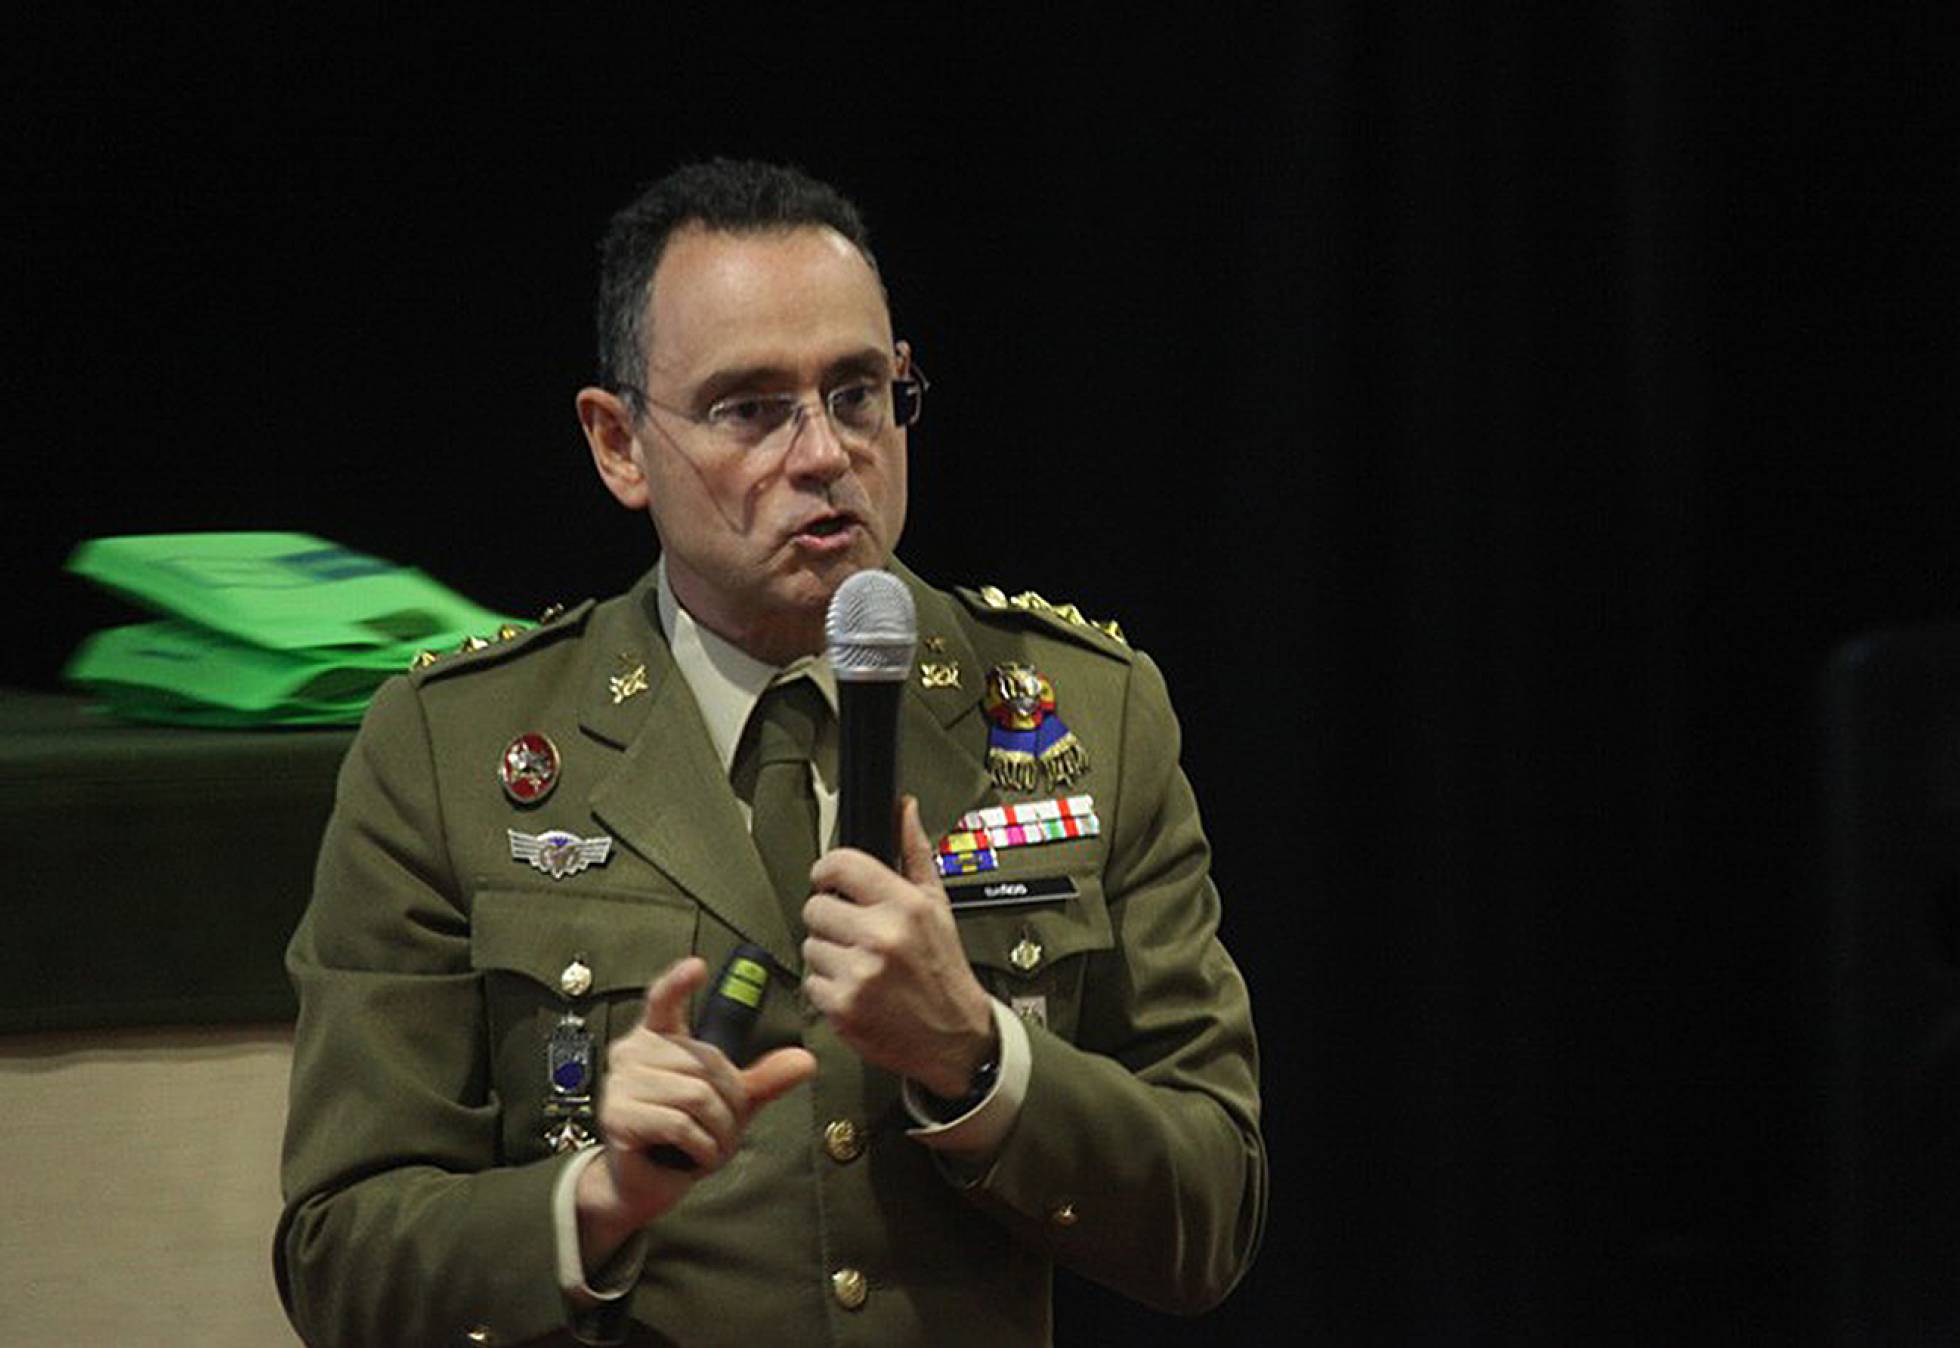 The Spanish director of national security believes in UFOs